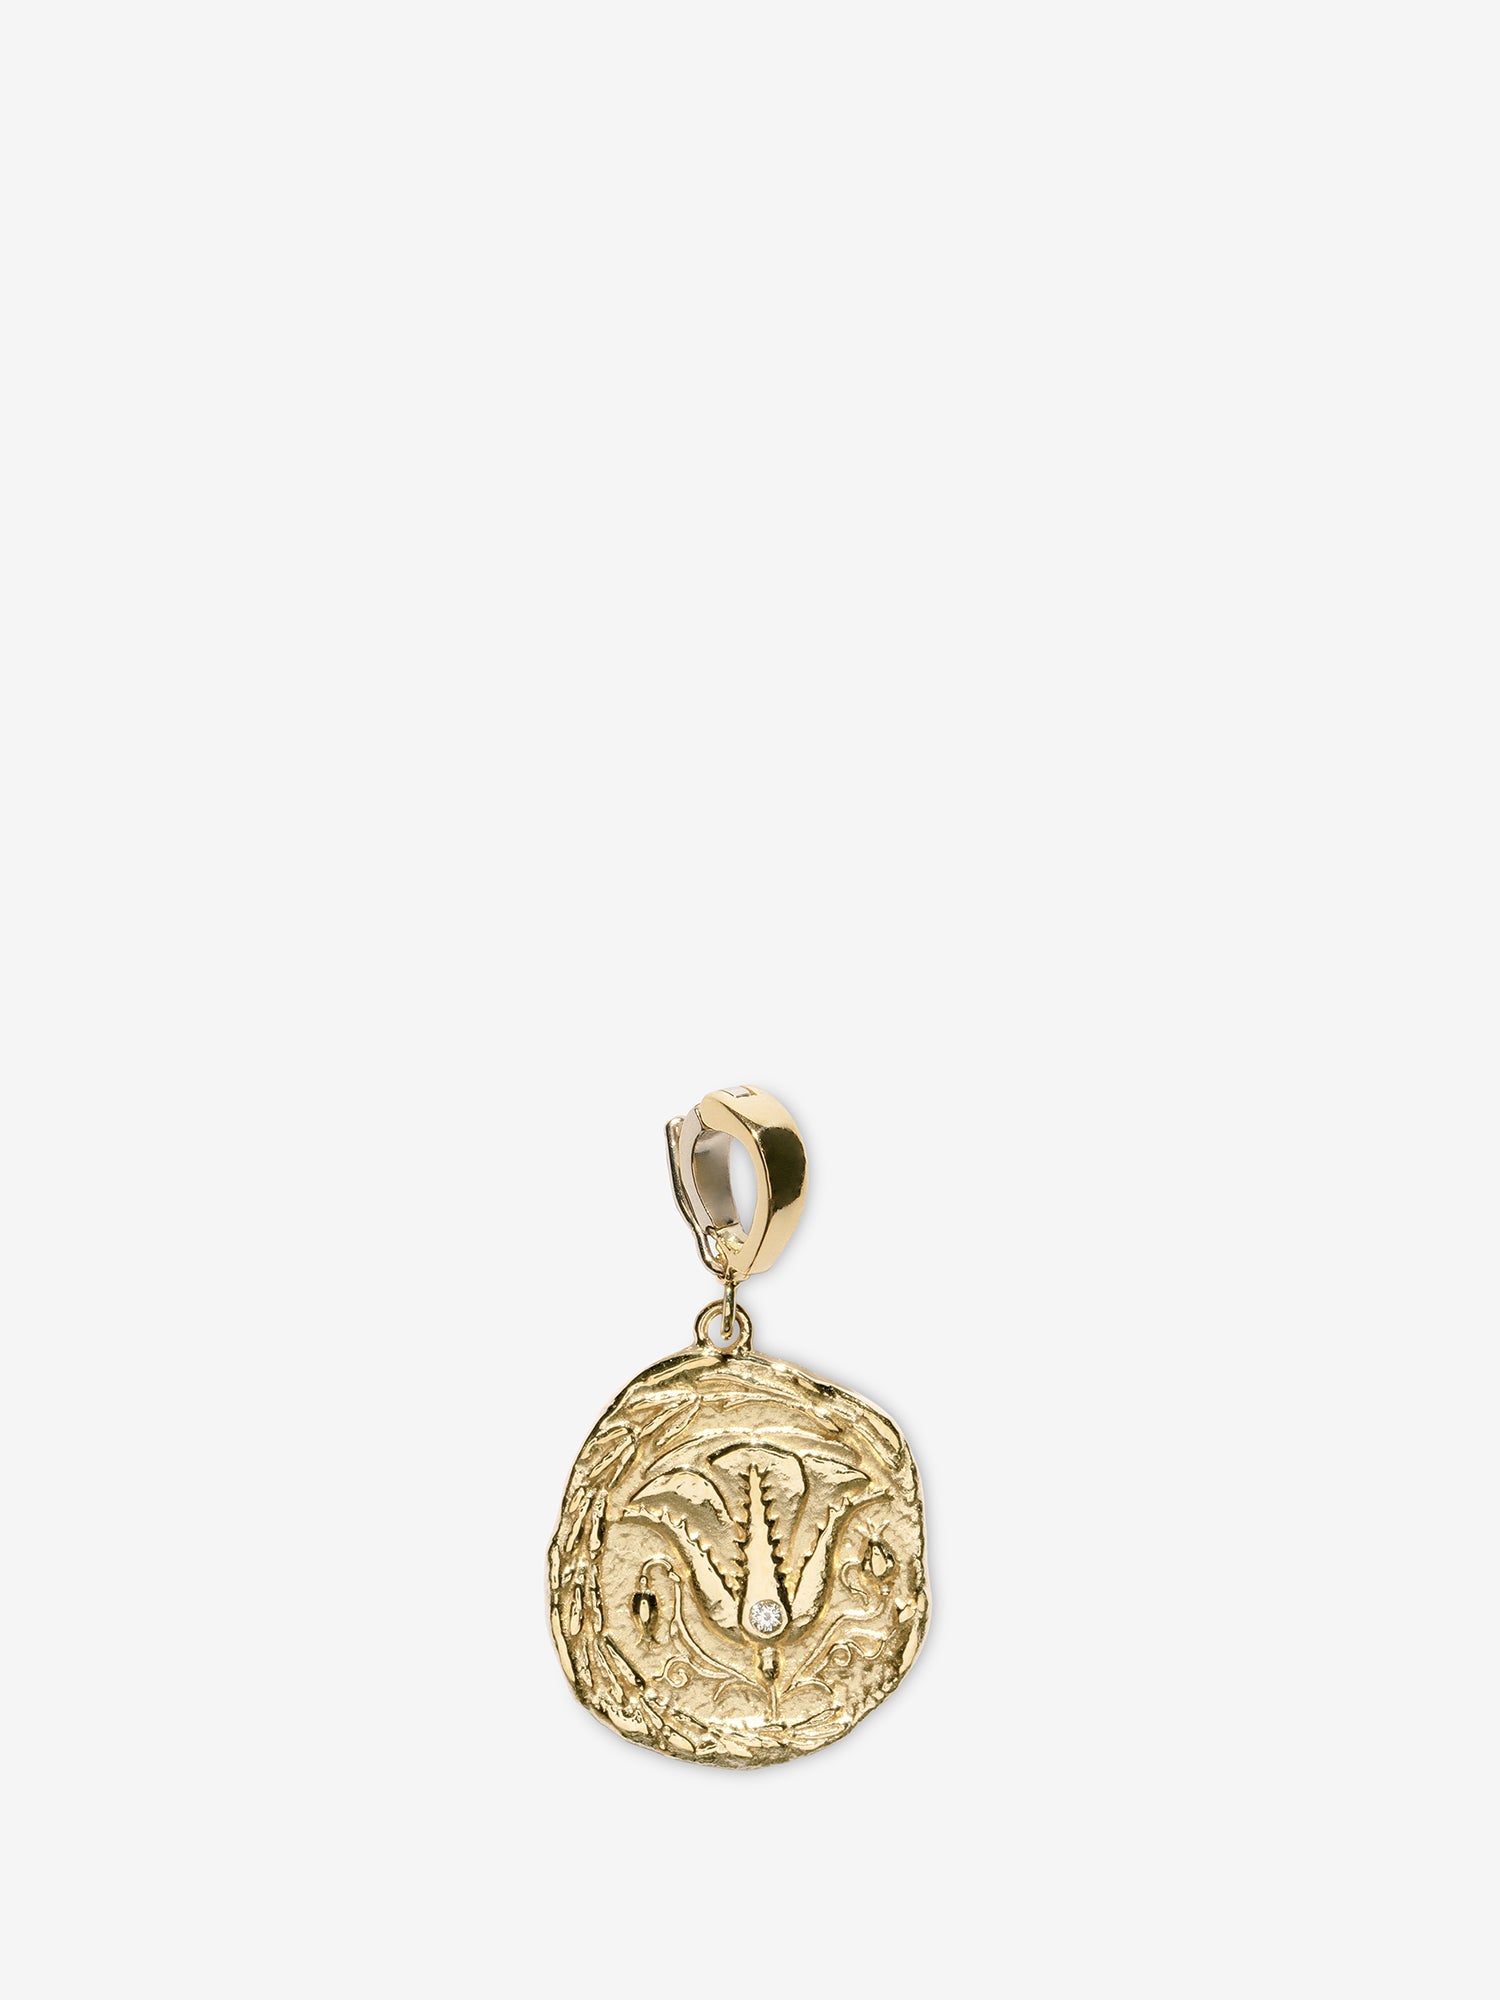 Of the Earth Small Diamond Coin Charm